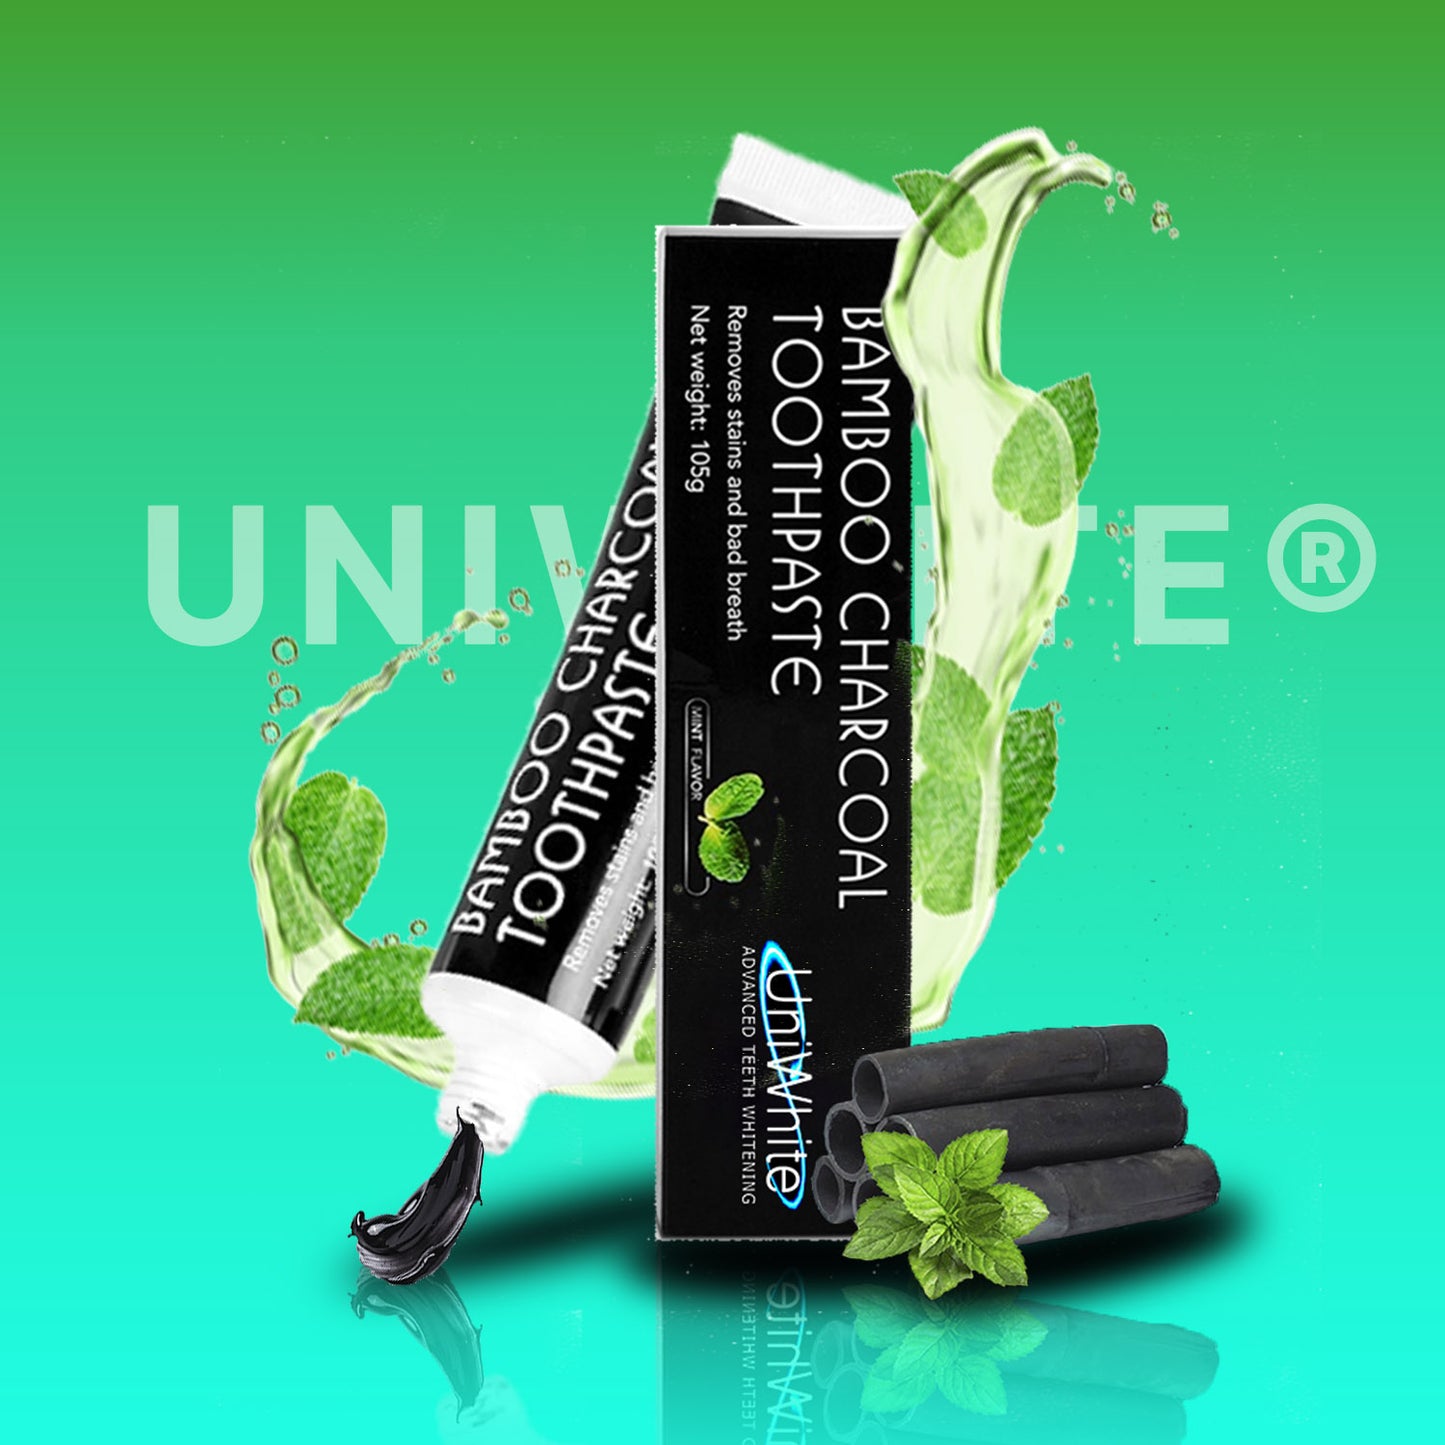 UNIWHITE® Charcoal Minted Toothpaste